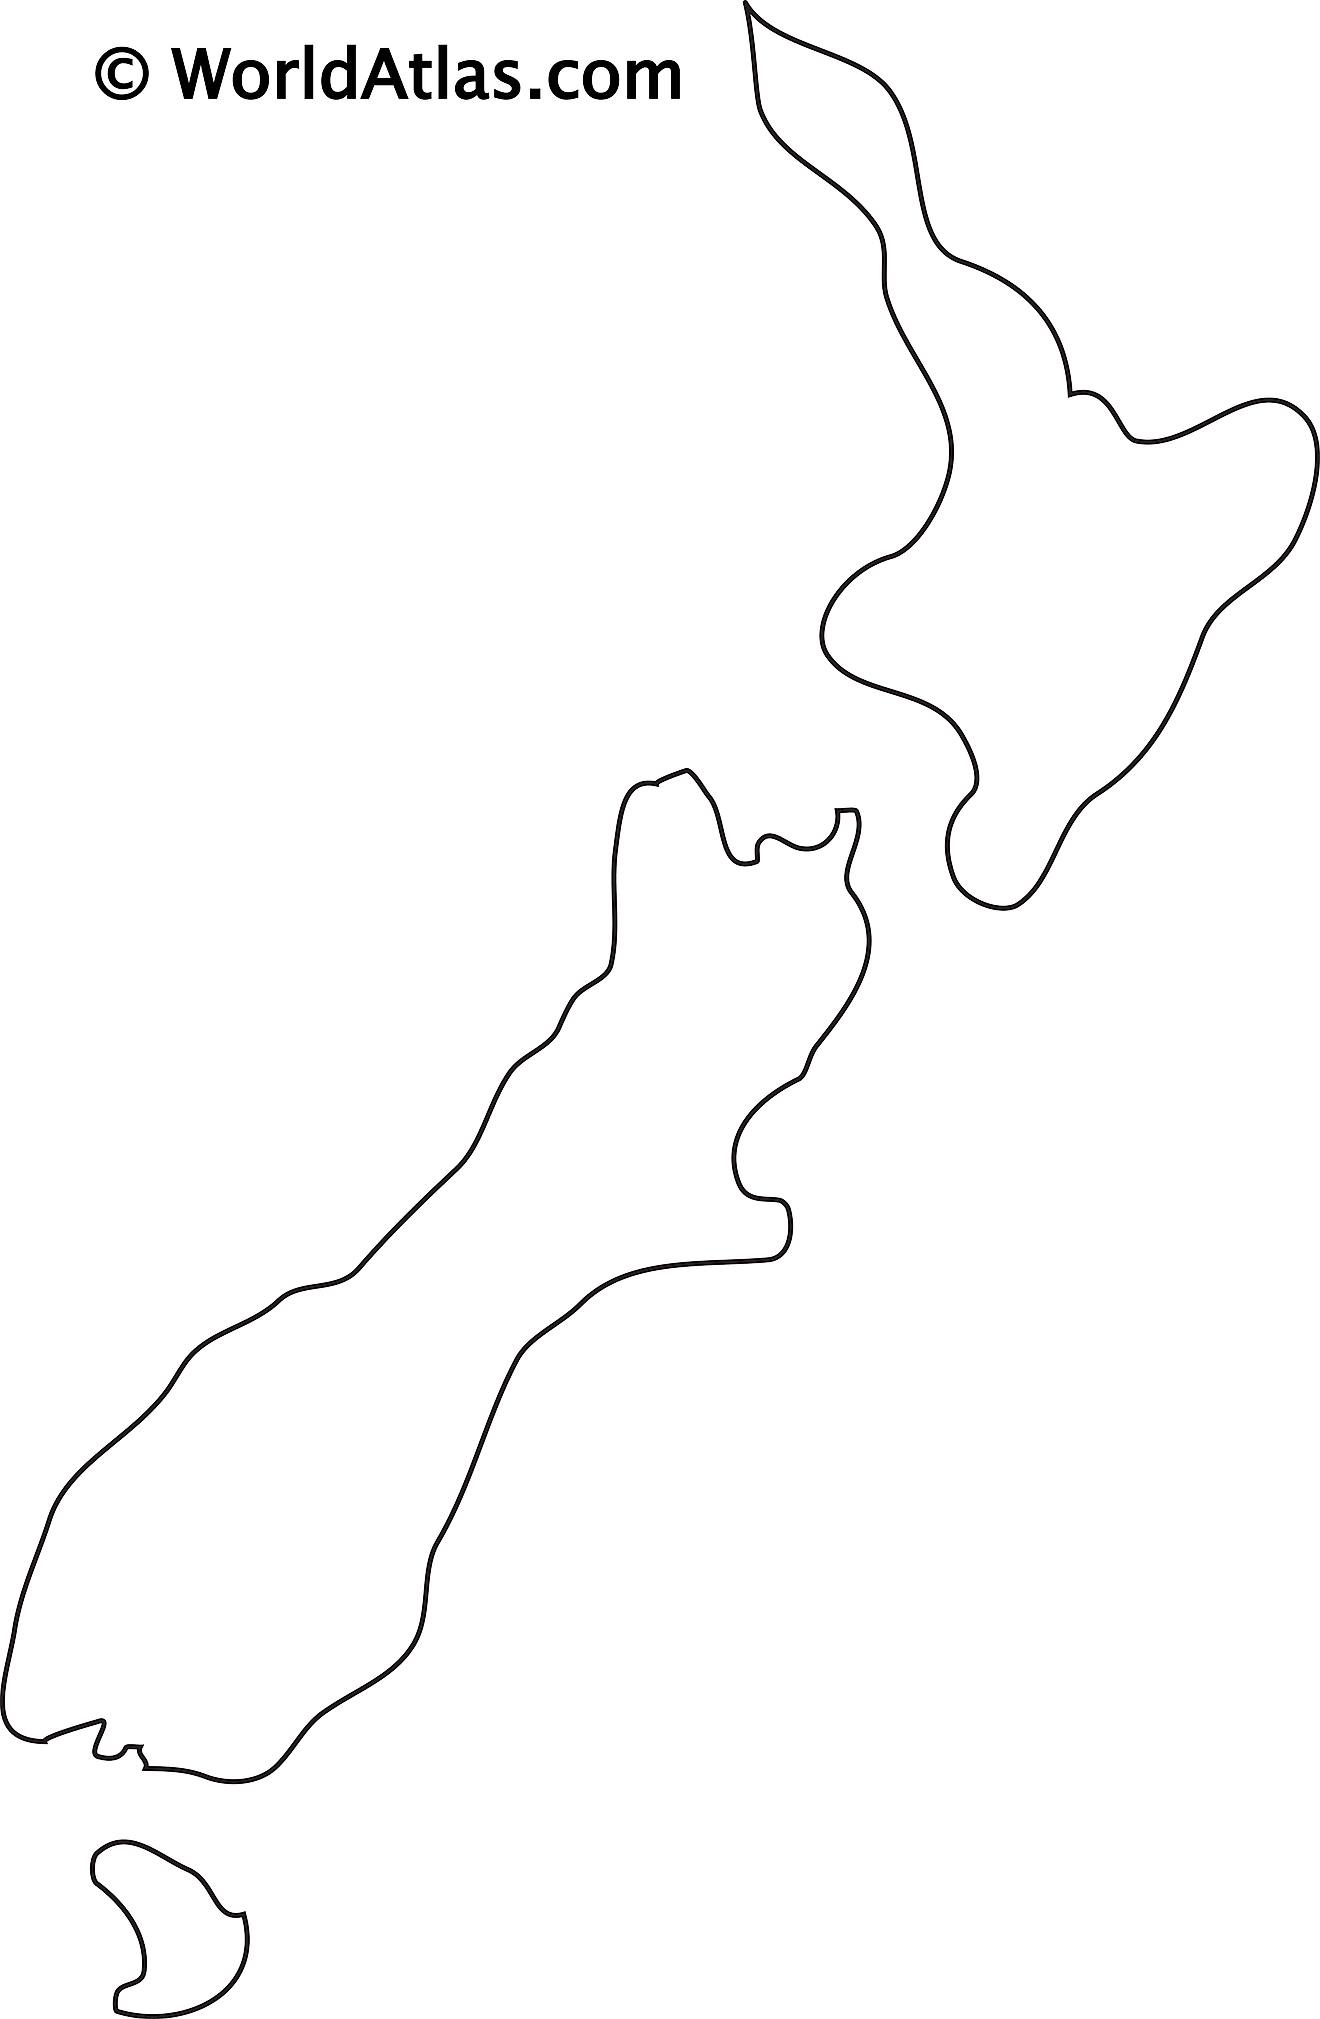 Blank Outline Map of New Zealand